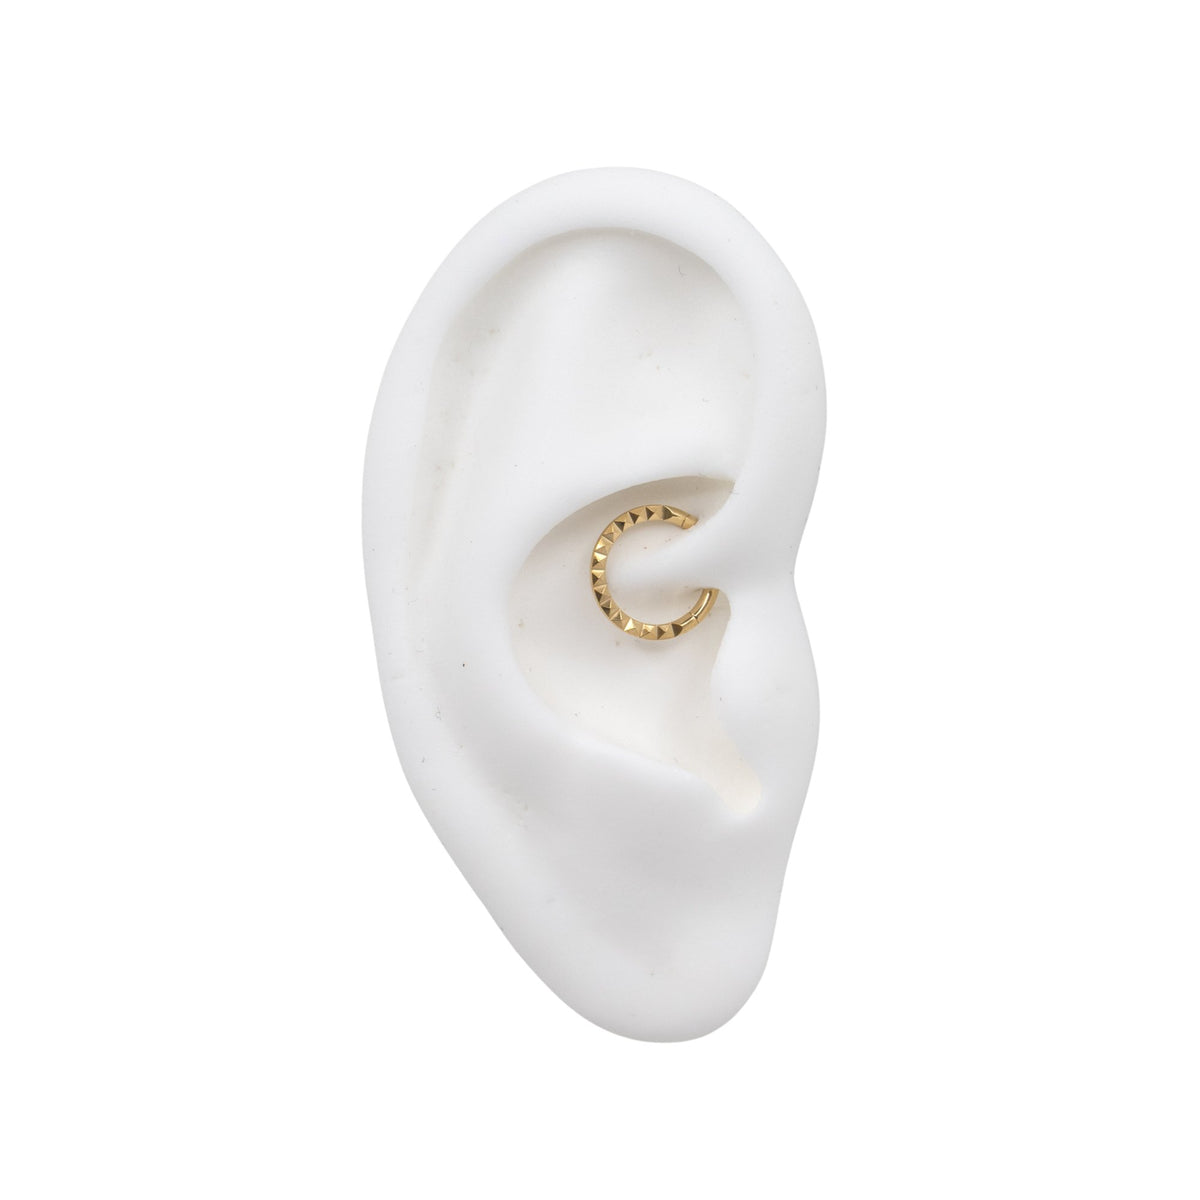 Yellow Gold Hoops Peaked Daith Clicker Hoop The Curated Lobe